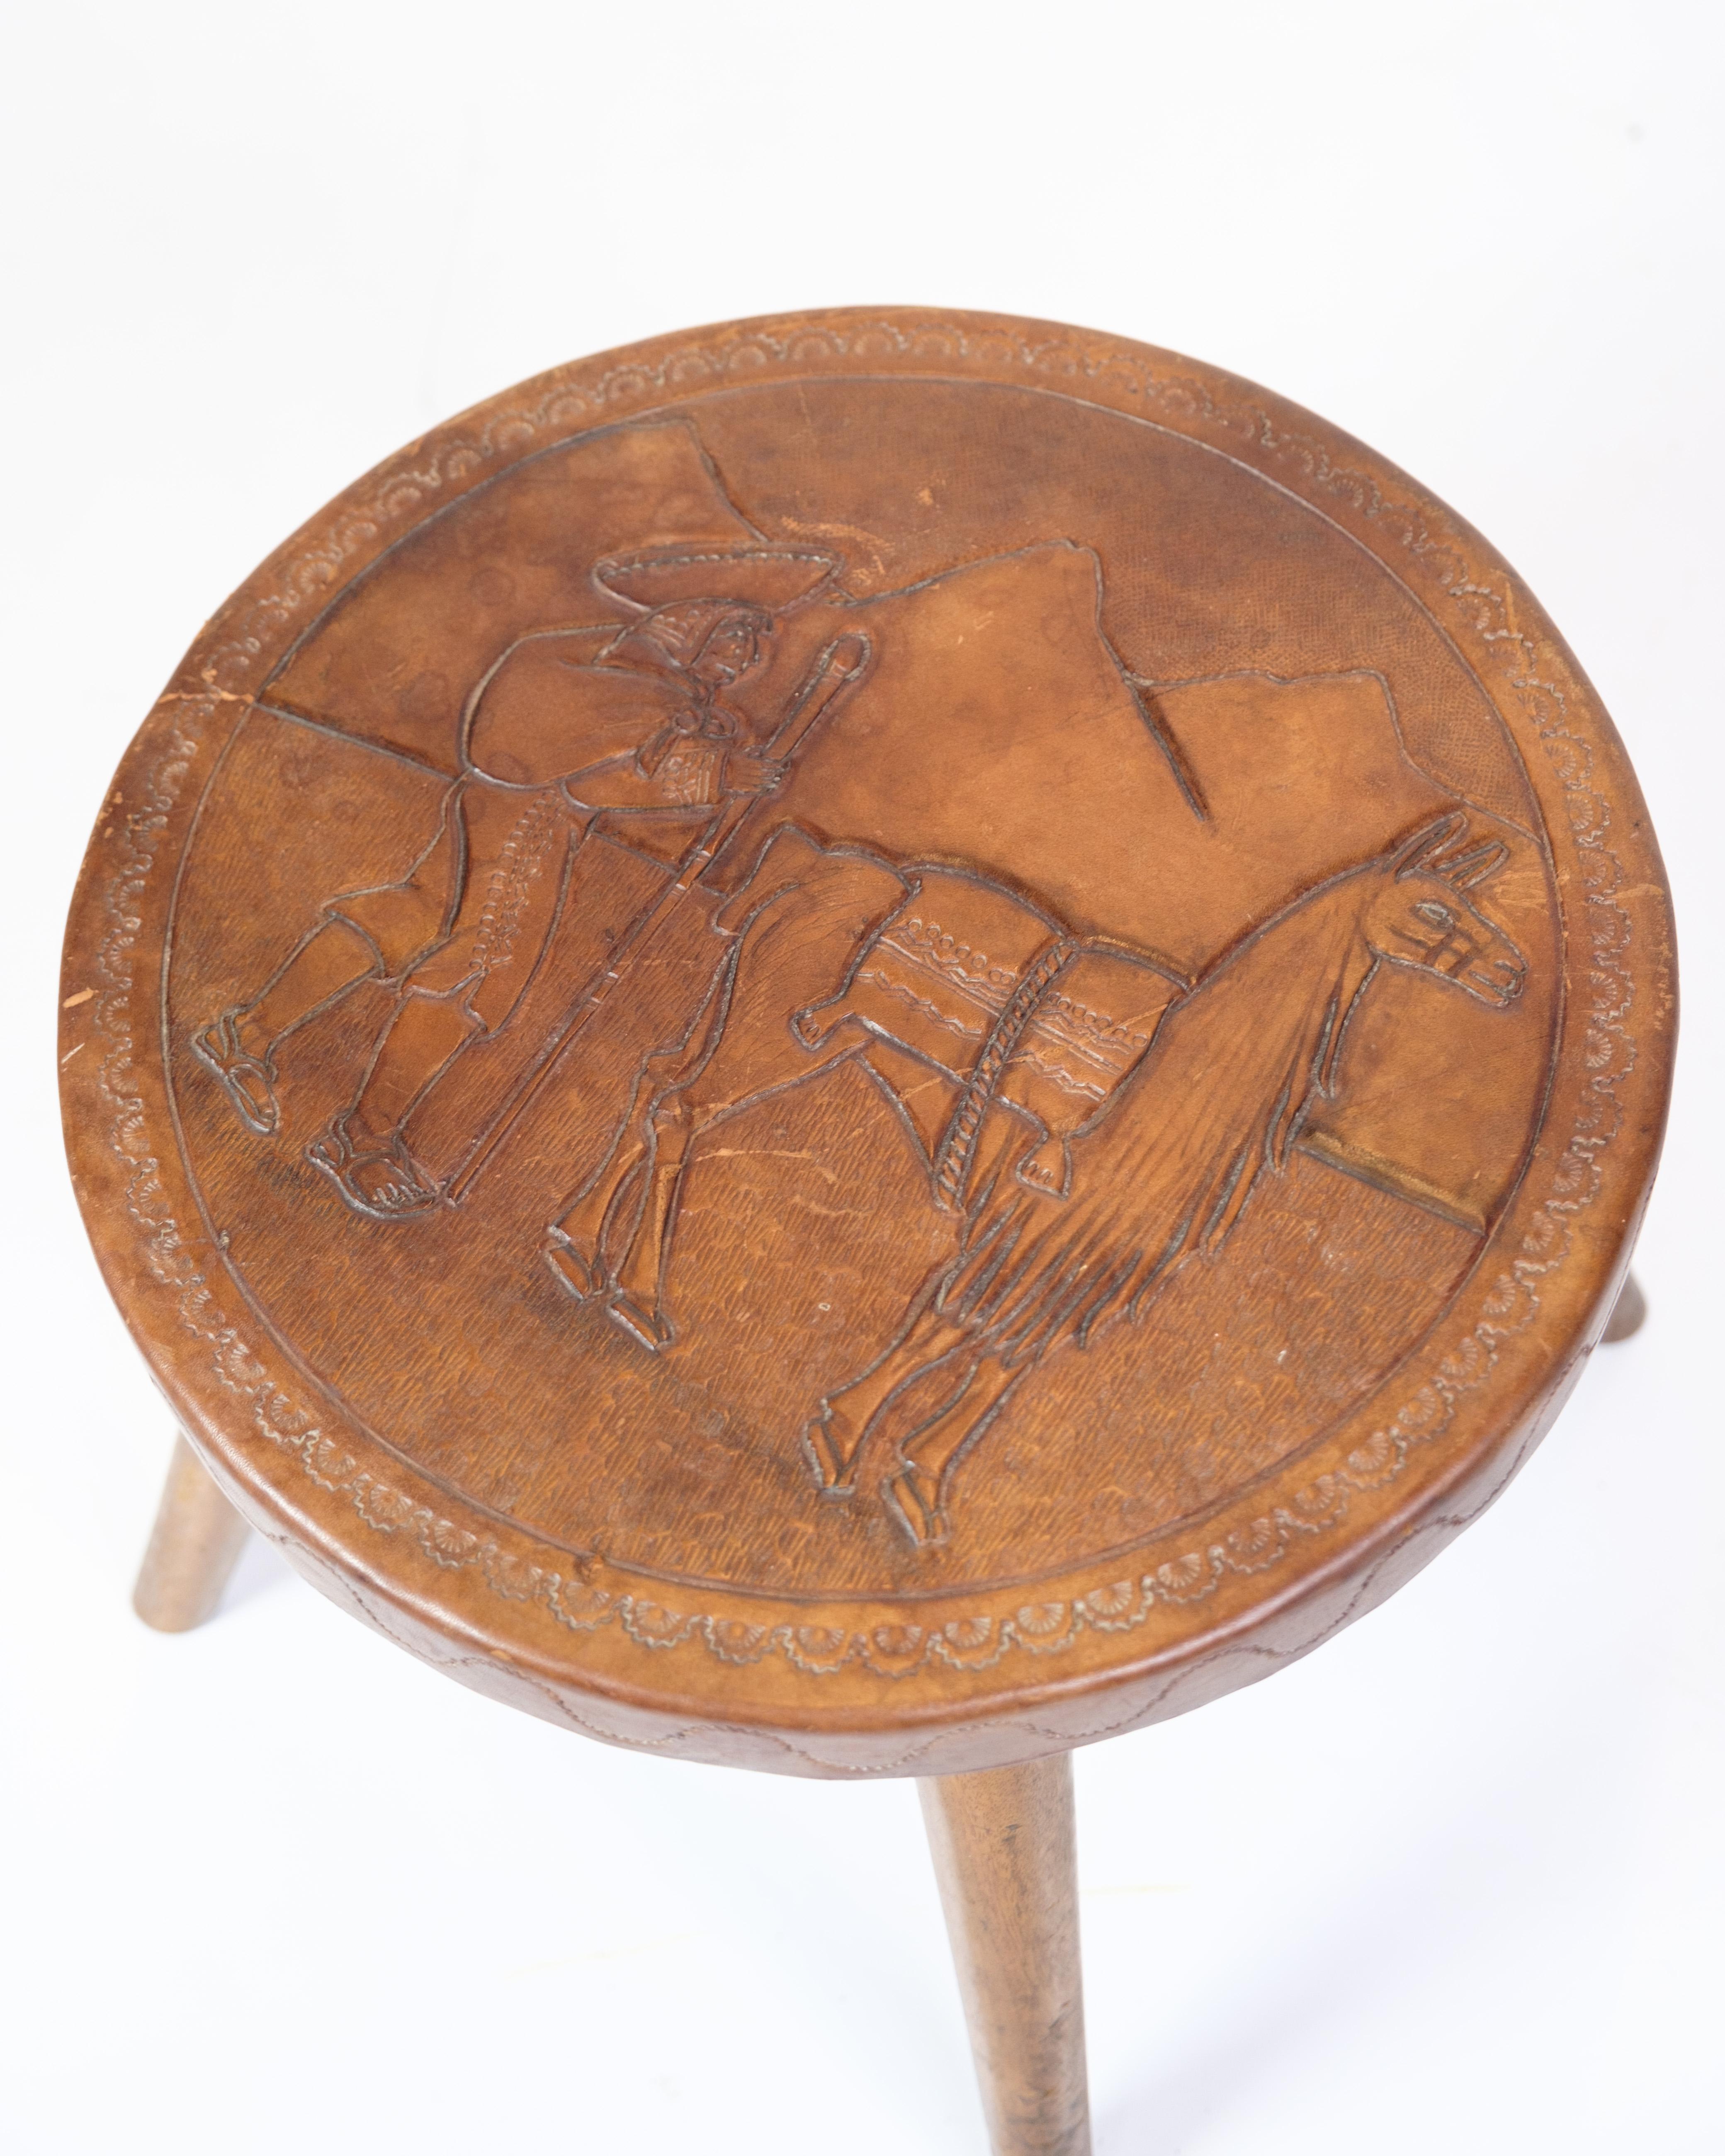 Wood Antique Stool With Carvings Of Farmer With Alpaca From 1940s For Sale